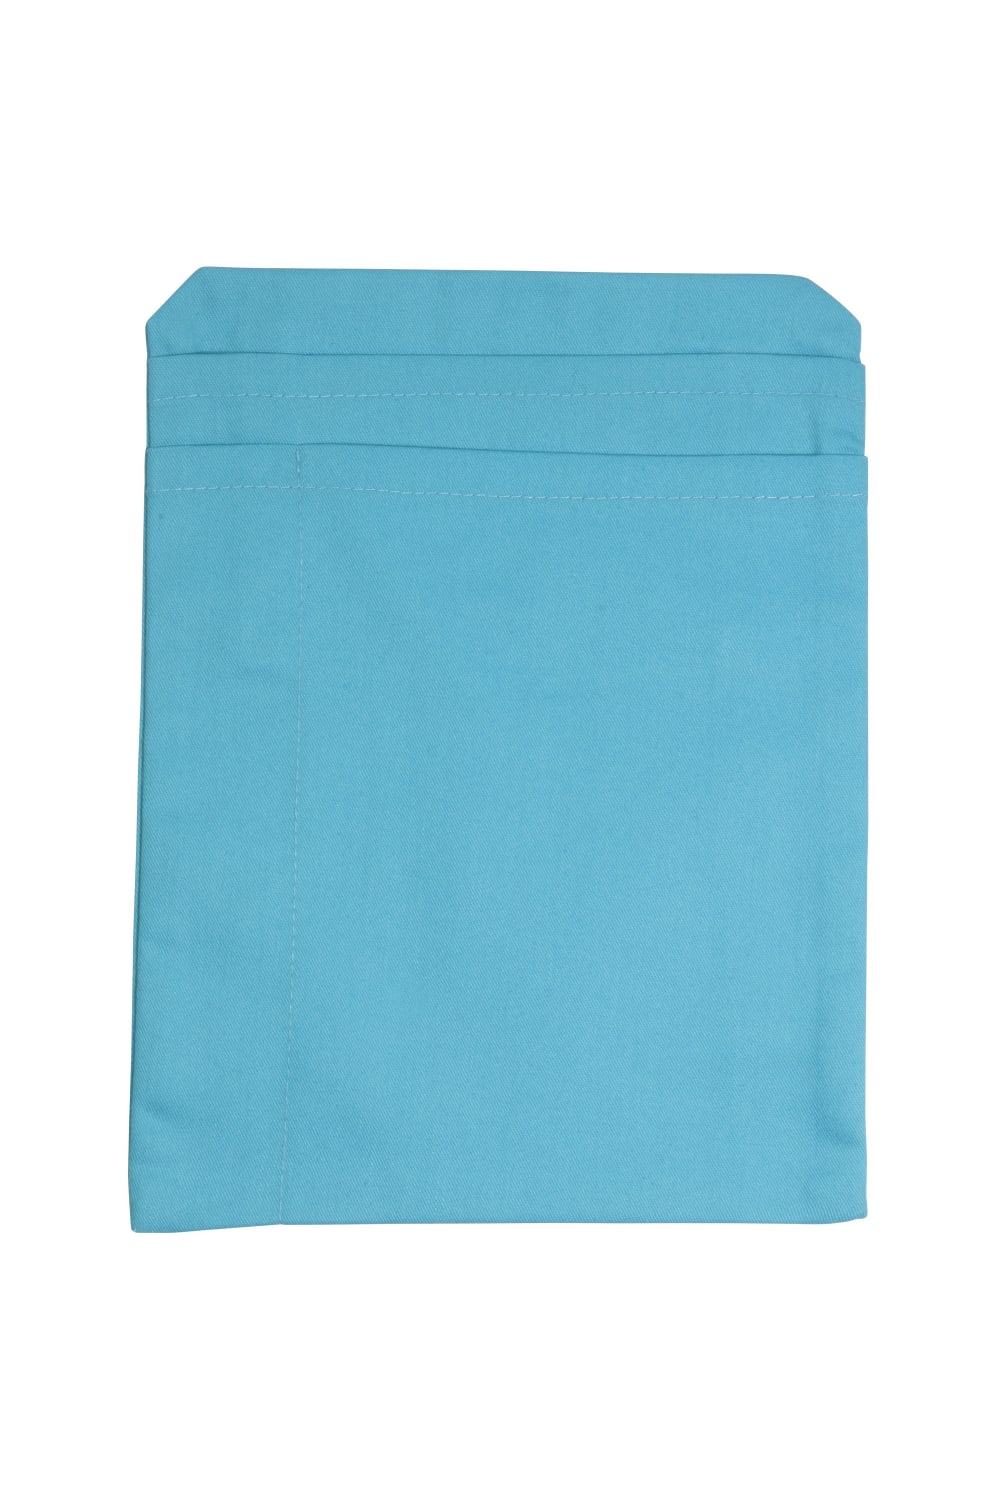 Premier Apron Wallet (Pack of 2) (Turquoise) (One Size)